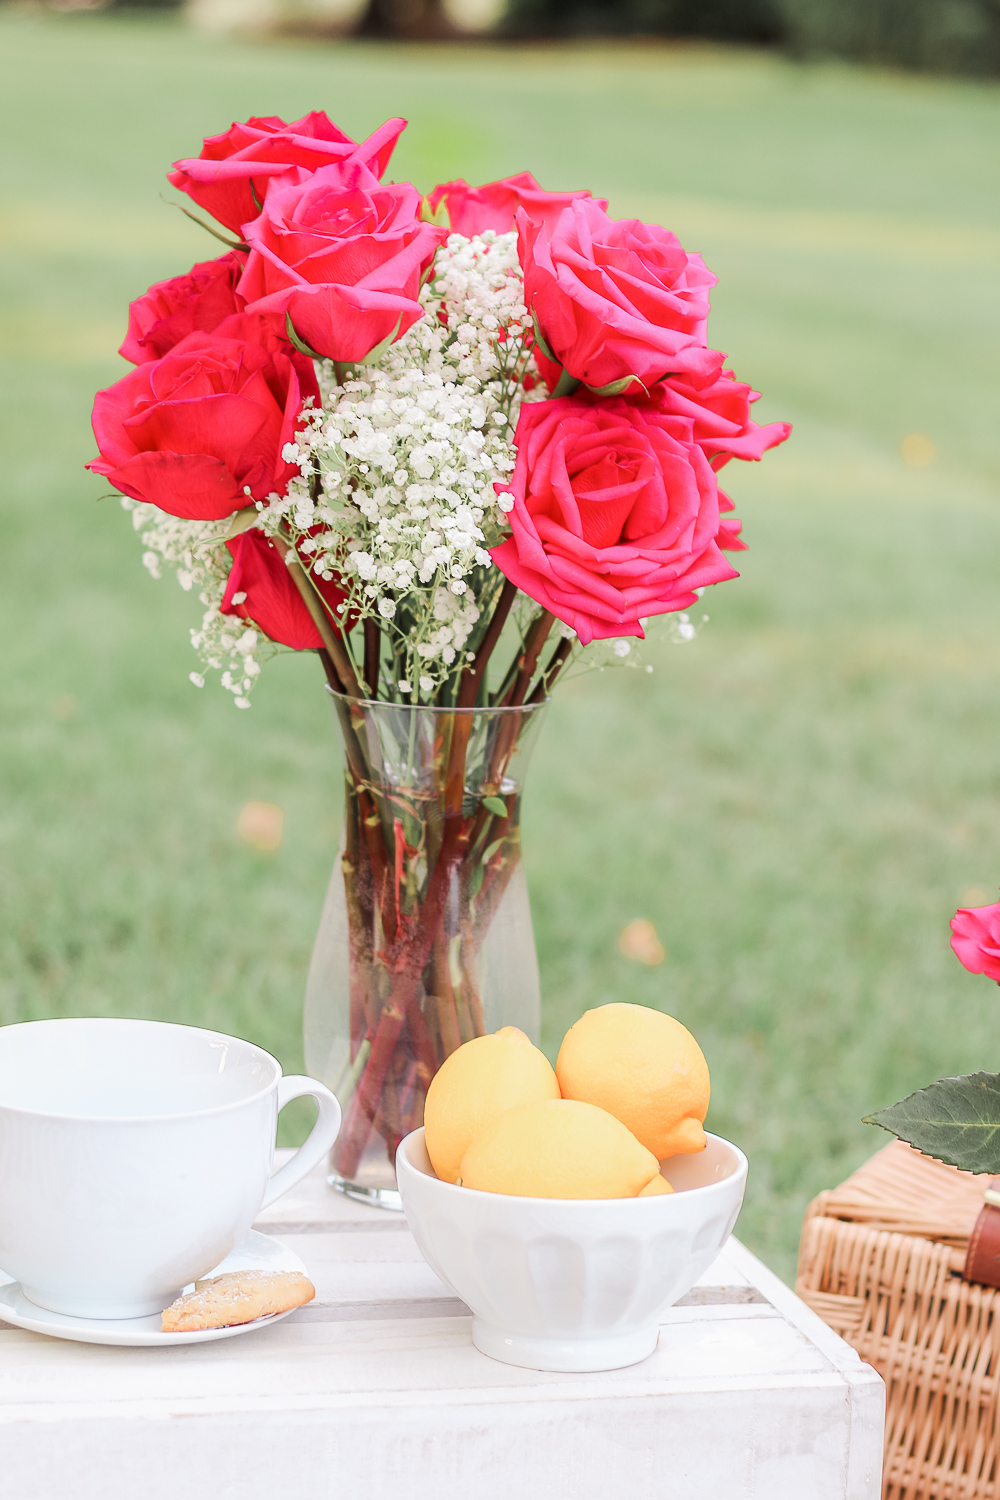 Pink roses and baby's breath at a tea party picnic